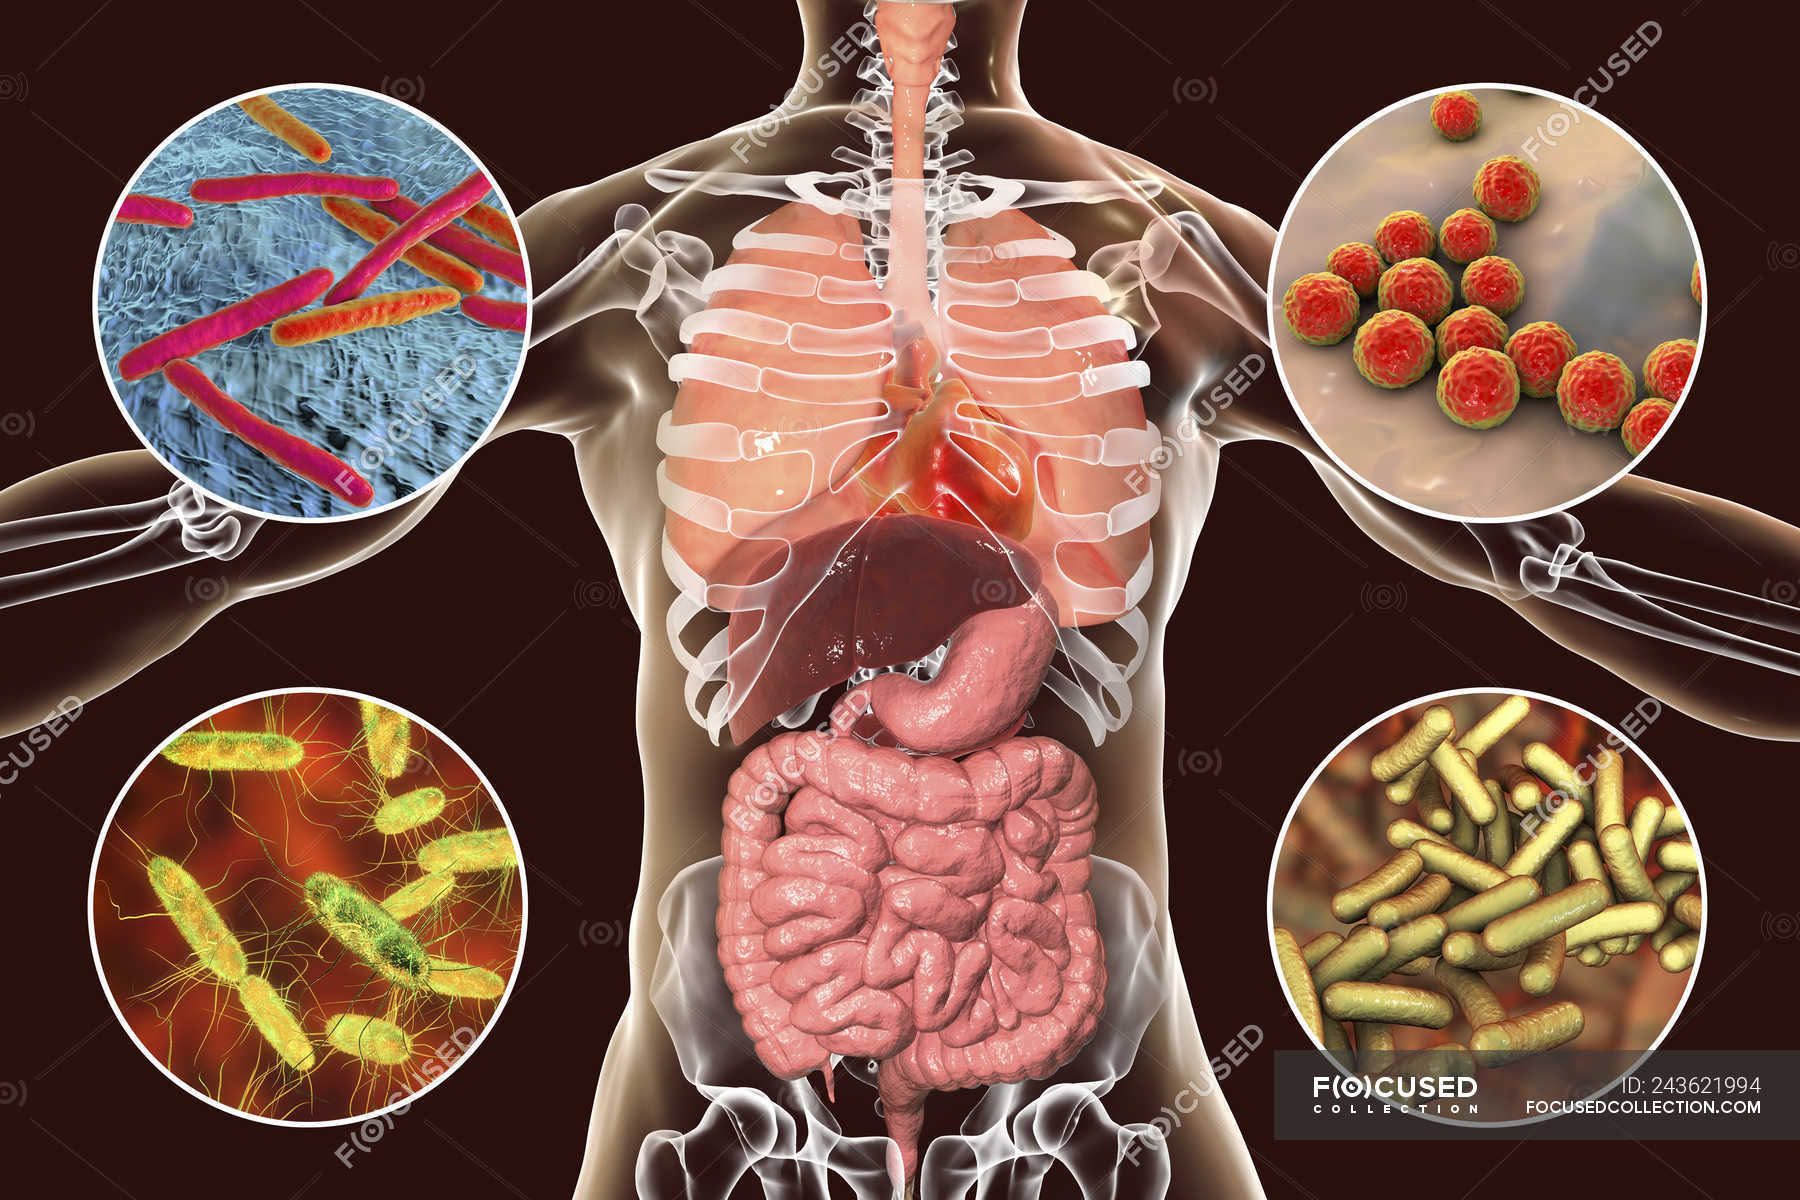 Digital illustration showing bacteria causing infections of respiratory